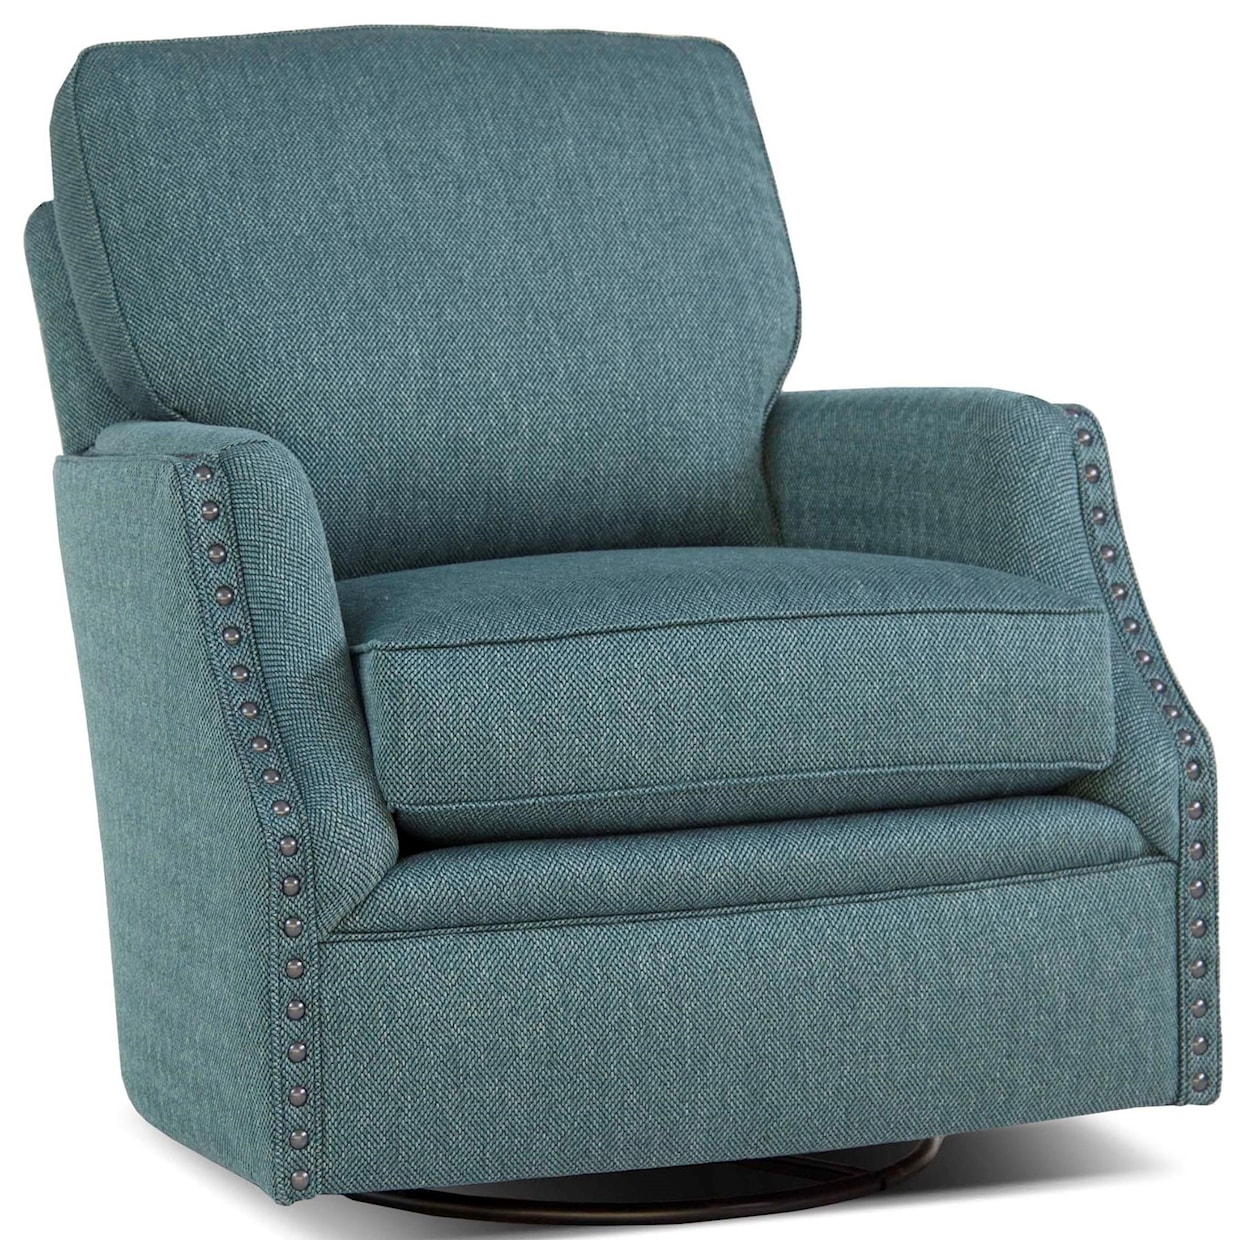 Smith Brothers 526 Swivel Glider Chair